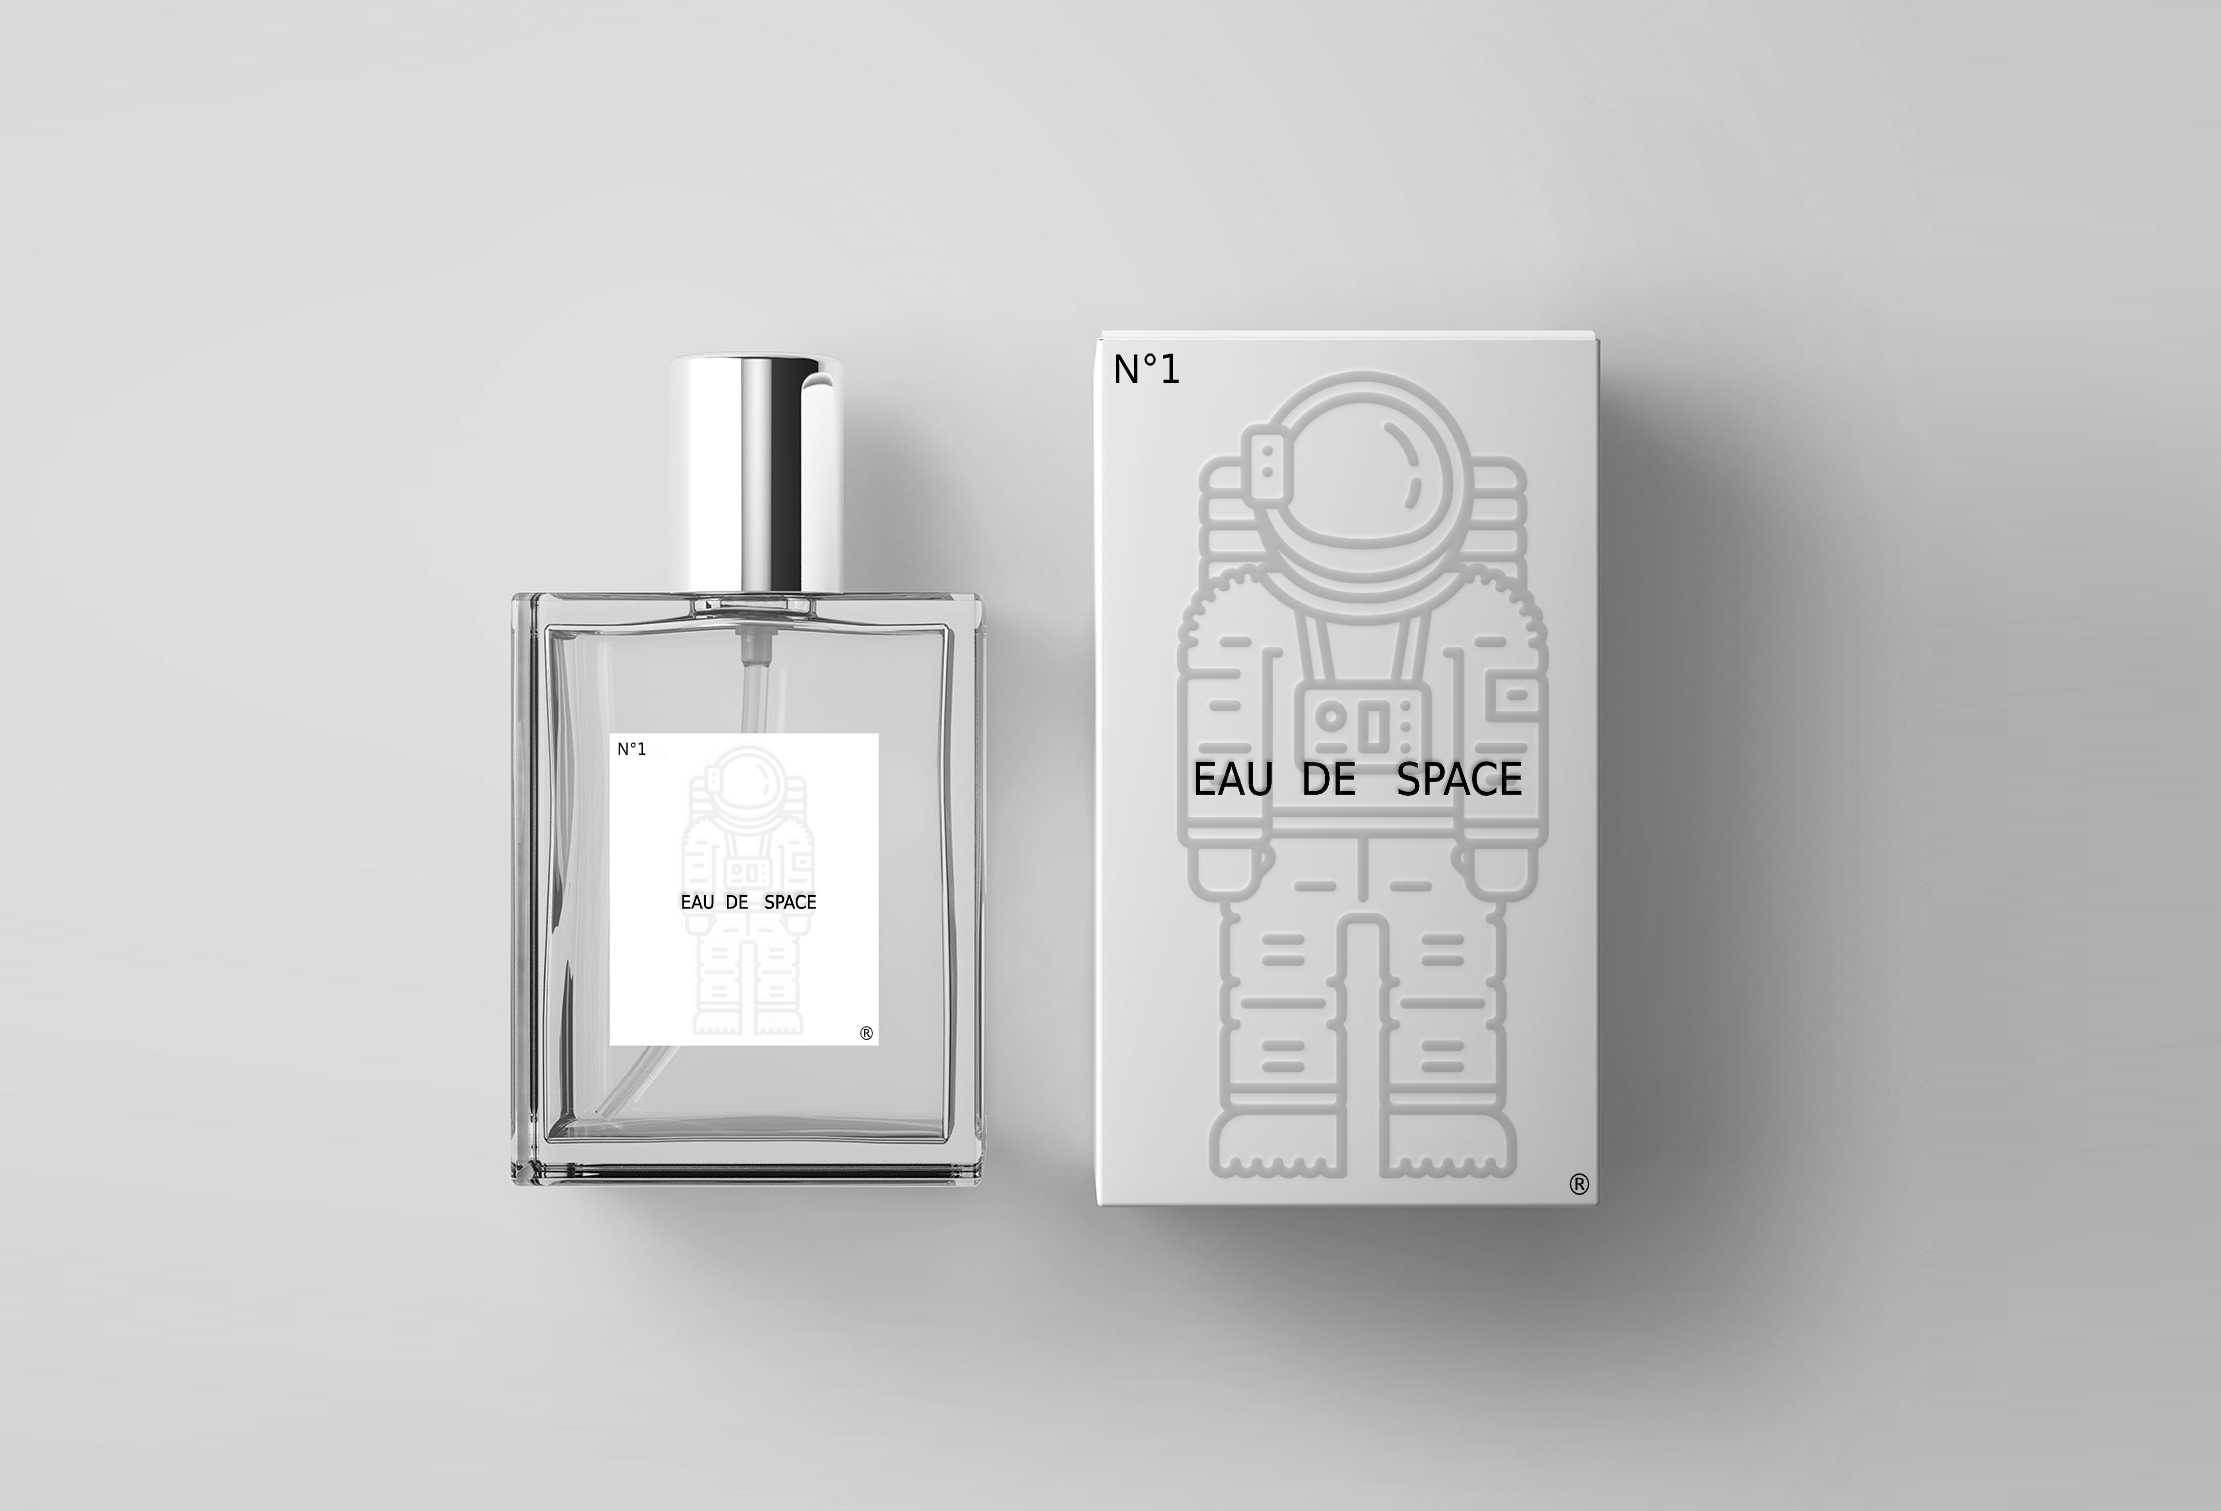 Eau de Space - "The Smell of Space" Fragrance, 100ml